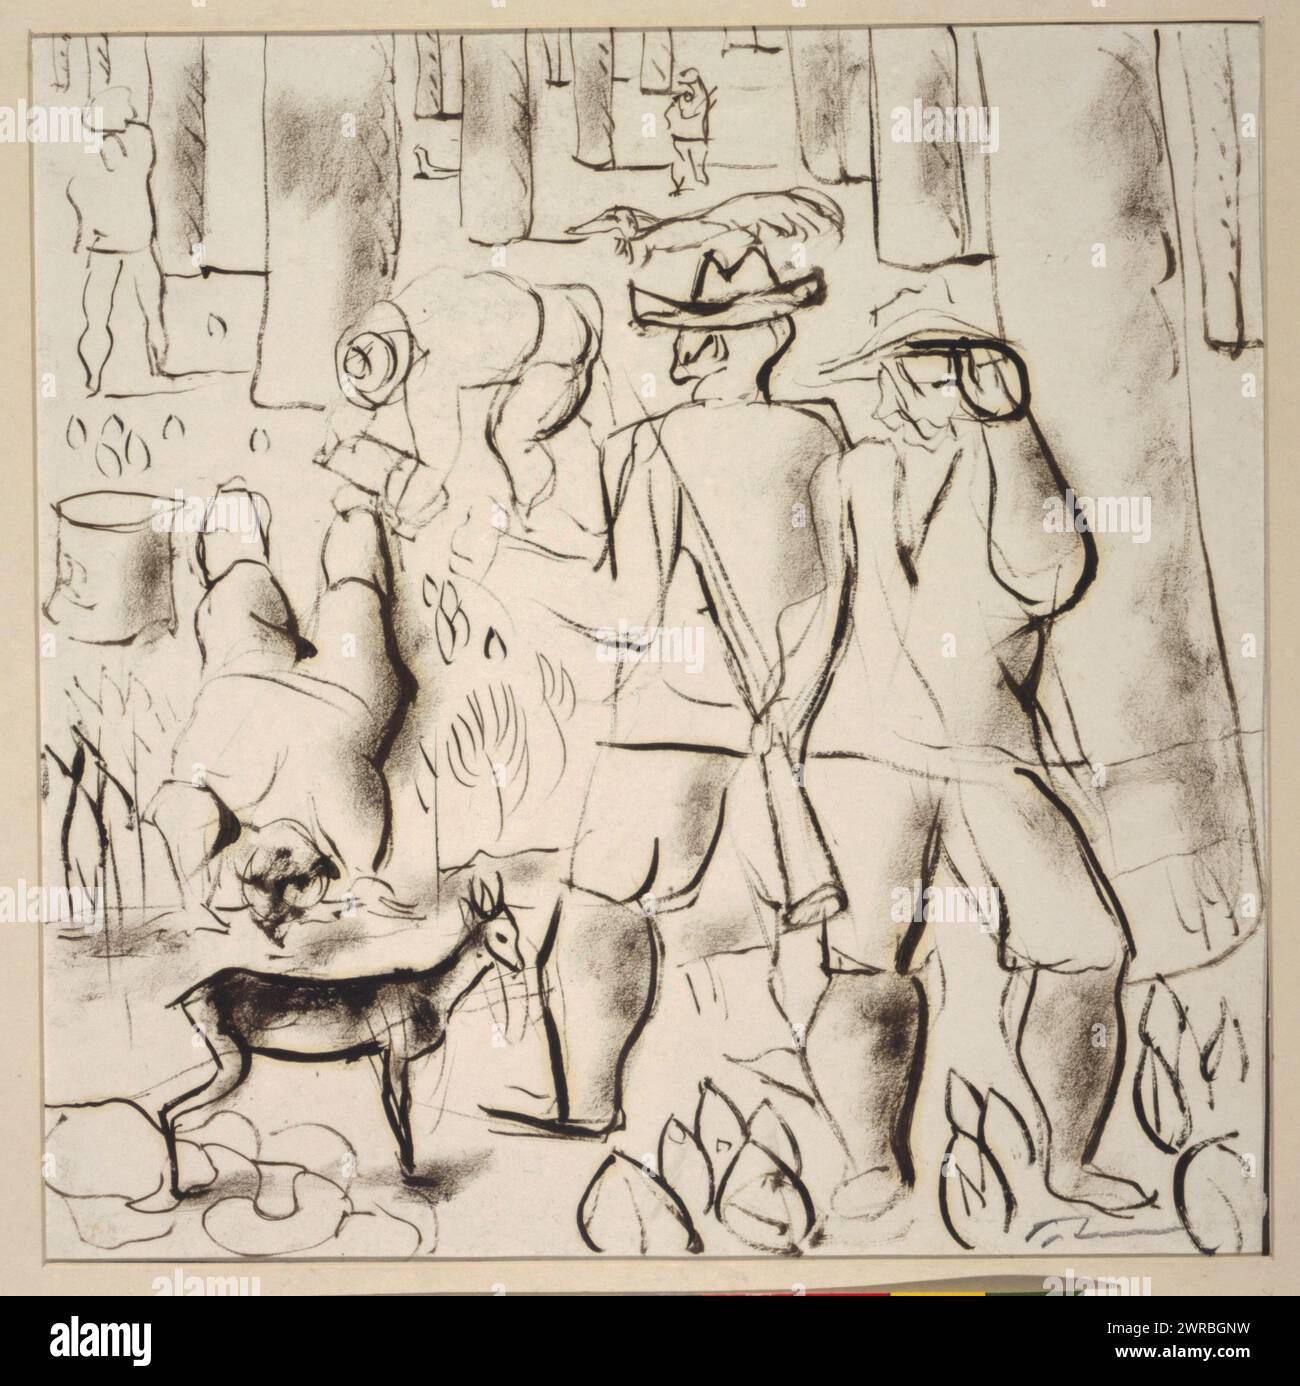 Study for 'Entry into the forest' mural, Drawing shows several men, one drinking from a stream, in a forest with a small deer., Portinari, Cândido, 1903-1962, artist, 1941, Men, 1940-1950, Ink drawings, Brazilian, 1940-1950., Ink drawings, Brazilian, 1940-1950, Studies (Visual works), 1940-1950, 1 drawing: ink, pastel, 28.8 x 28.7 cm Stock Photo